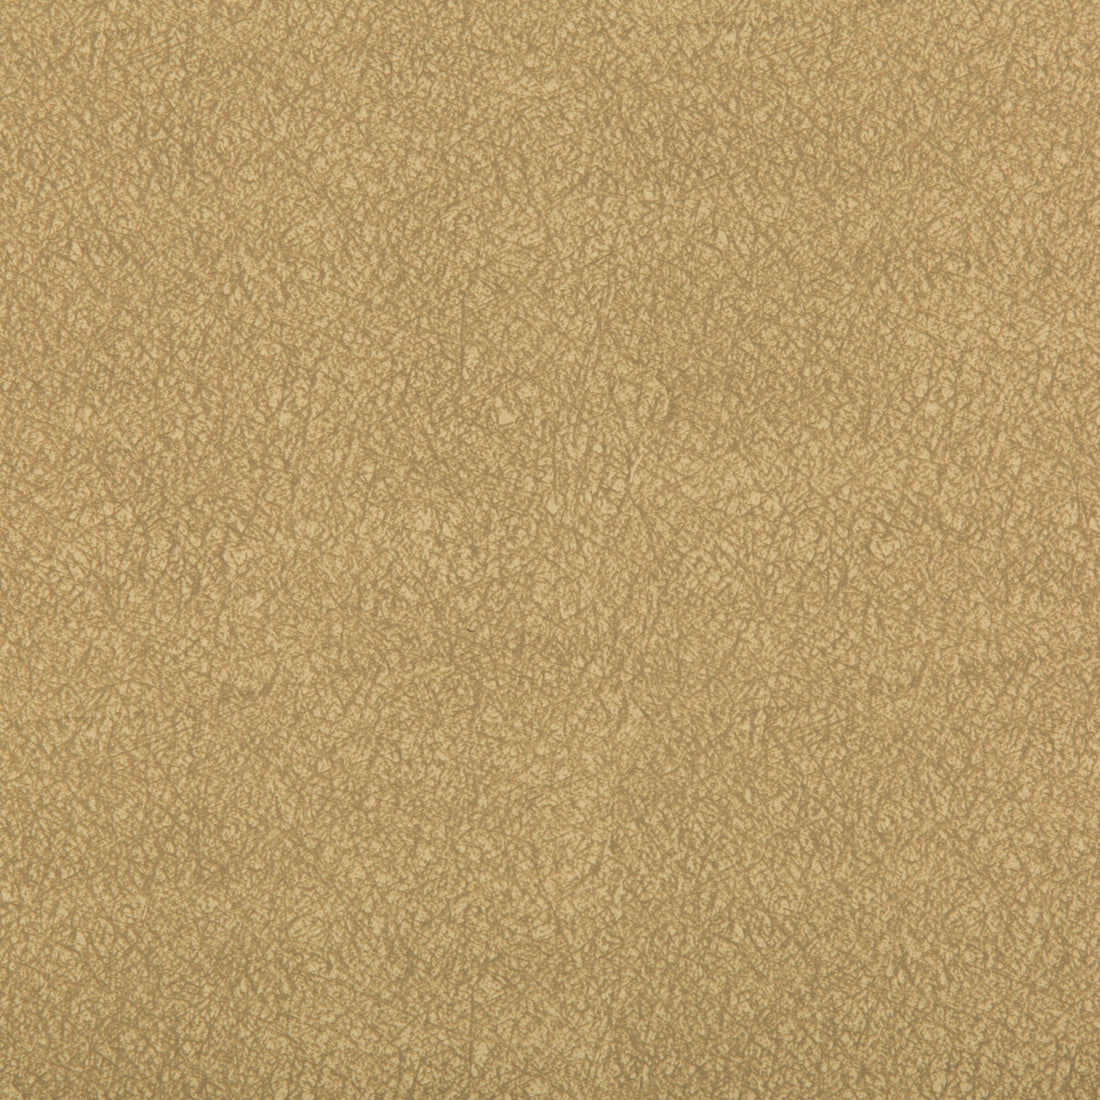 Ames fabric in sandalwood color - pattern AMES.1416.0 - by Kravet Contract